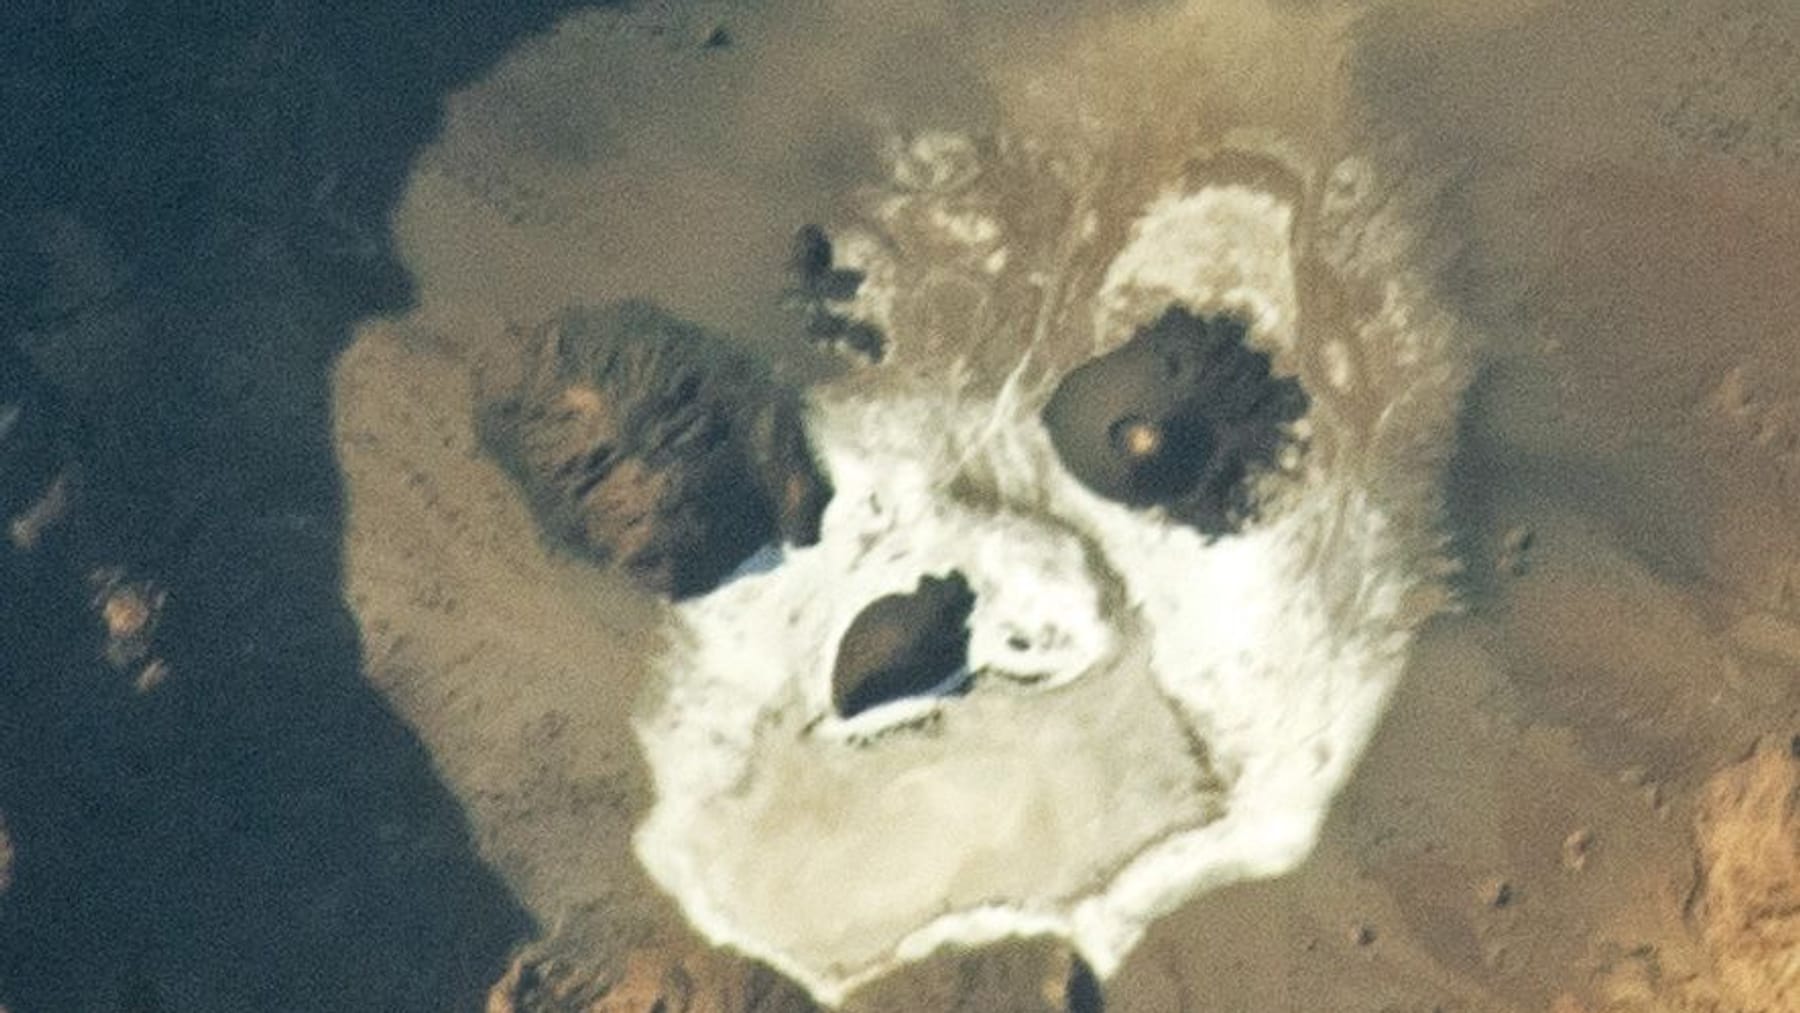 Skull photographed from the International Space Station